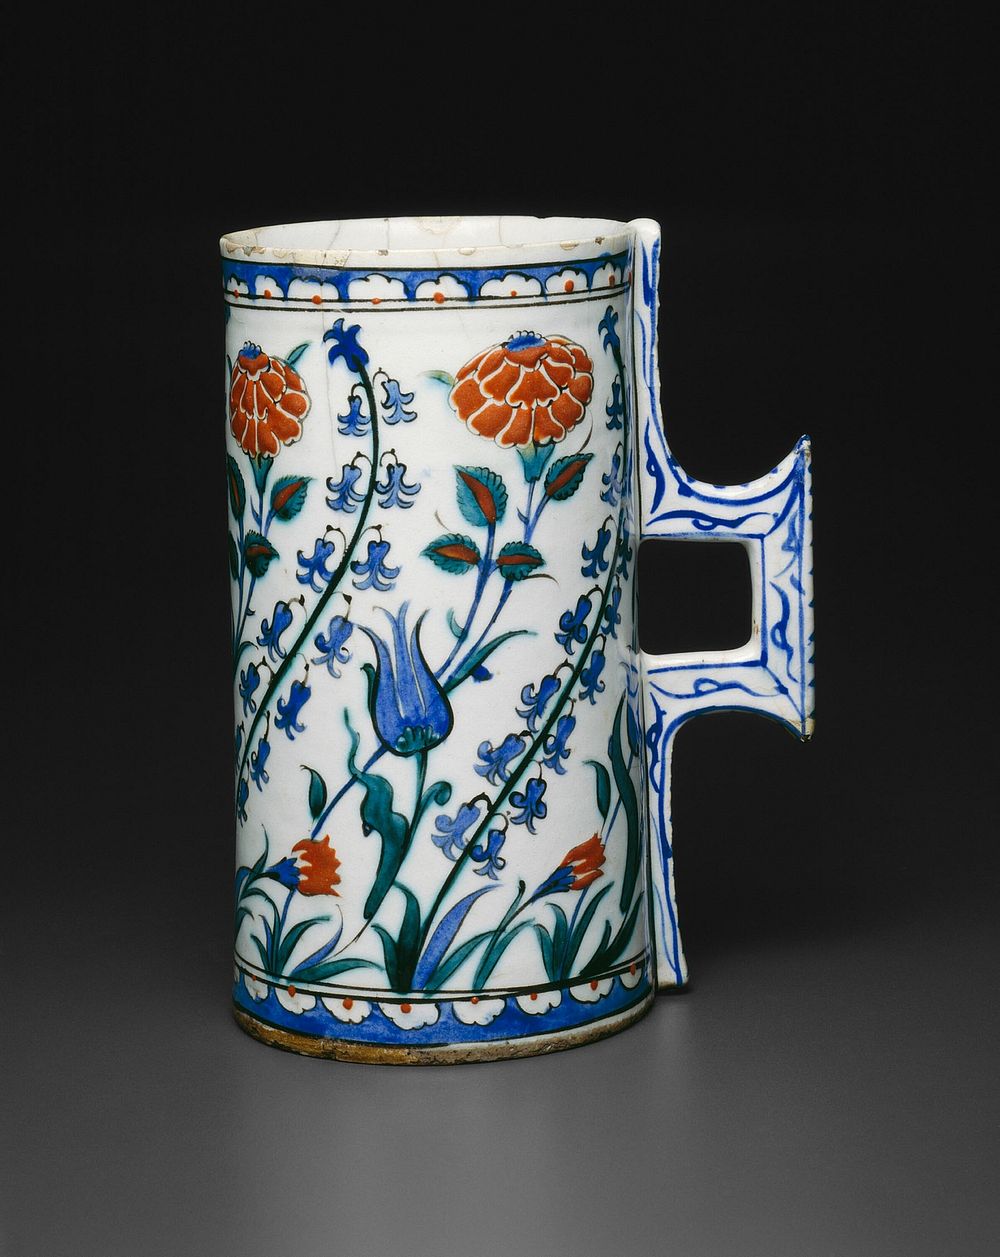 Tankard (Hanap) with Tulips, Hyacinths, Roses, and Carnations by Islamic